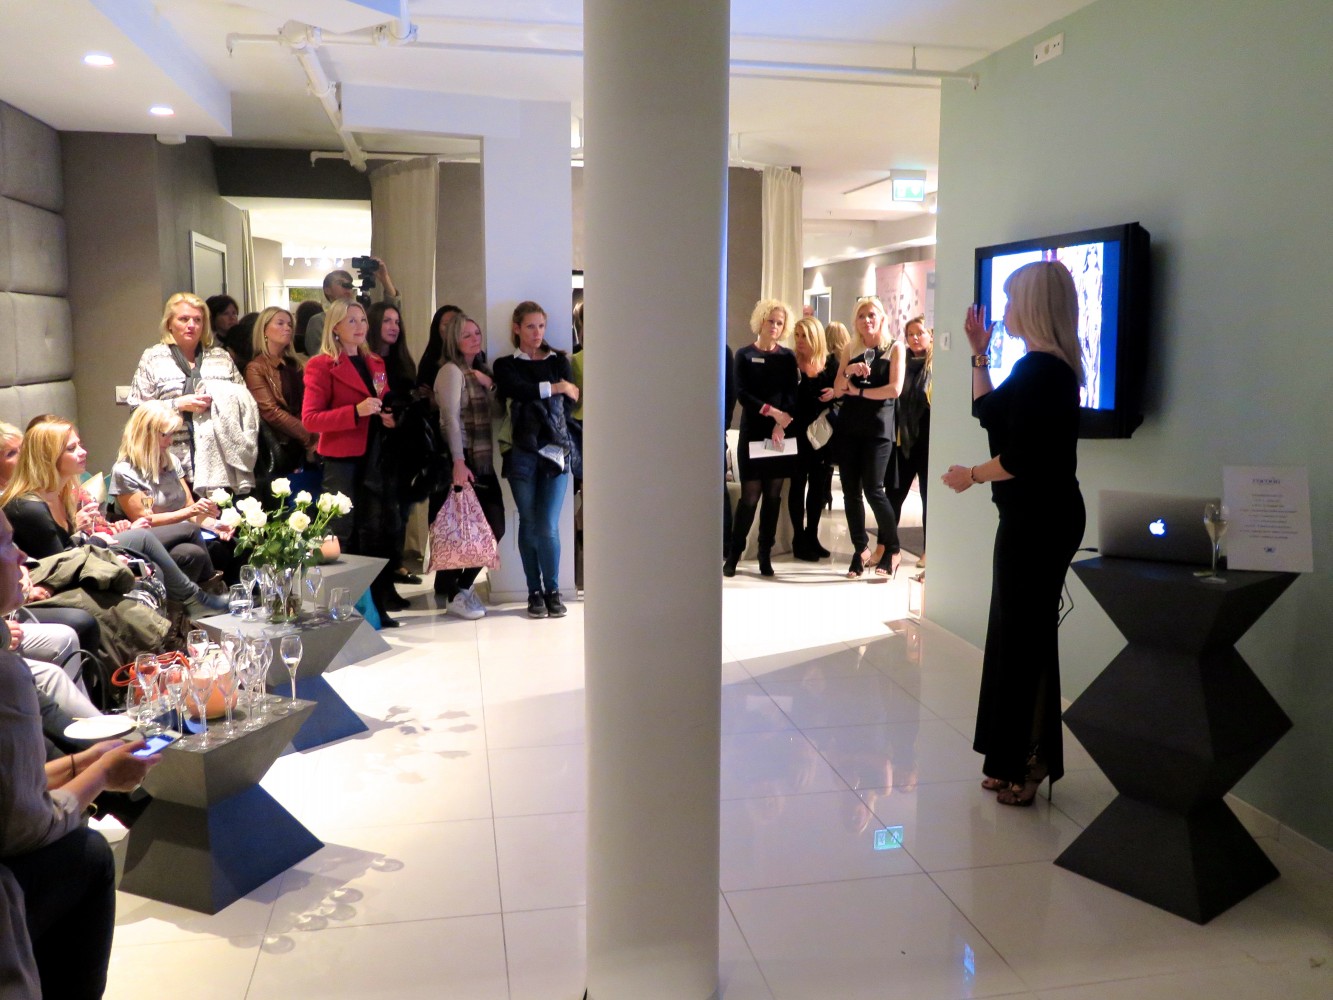 Marianne Jemtegård at the Beauty Vernissage at Cocoon Skin and their 5 Year Anniversary!